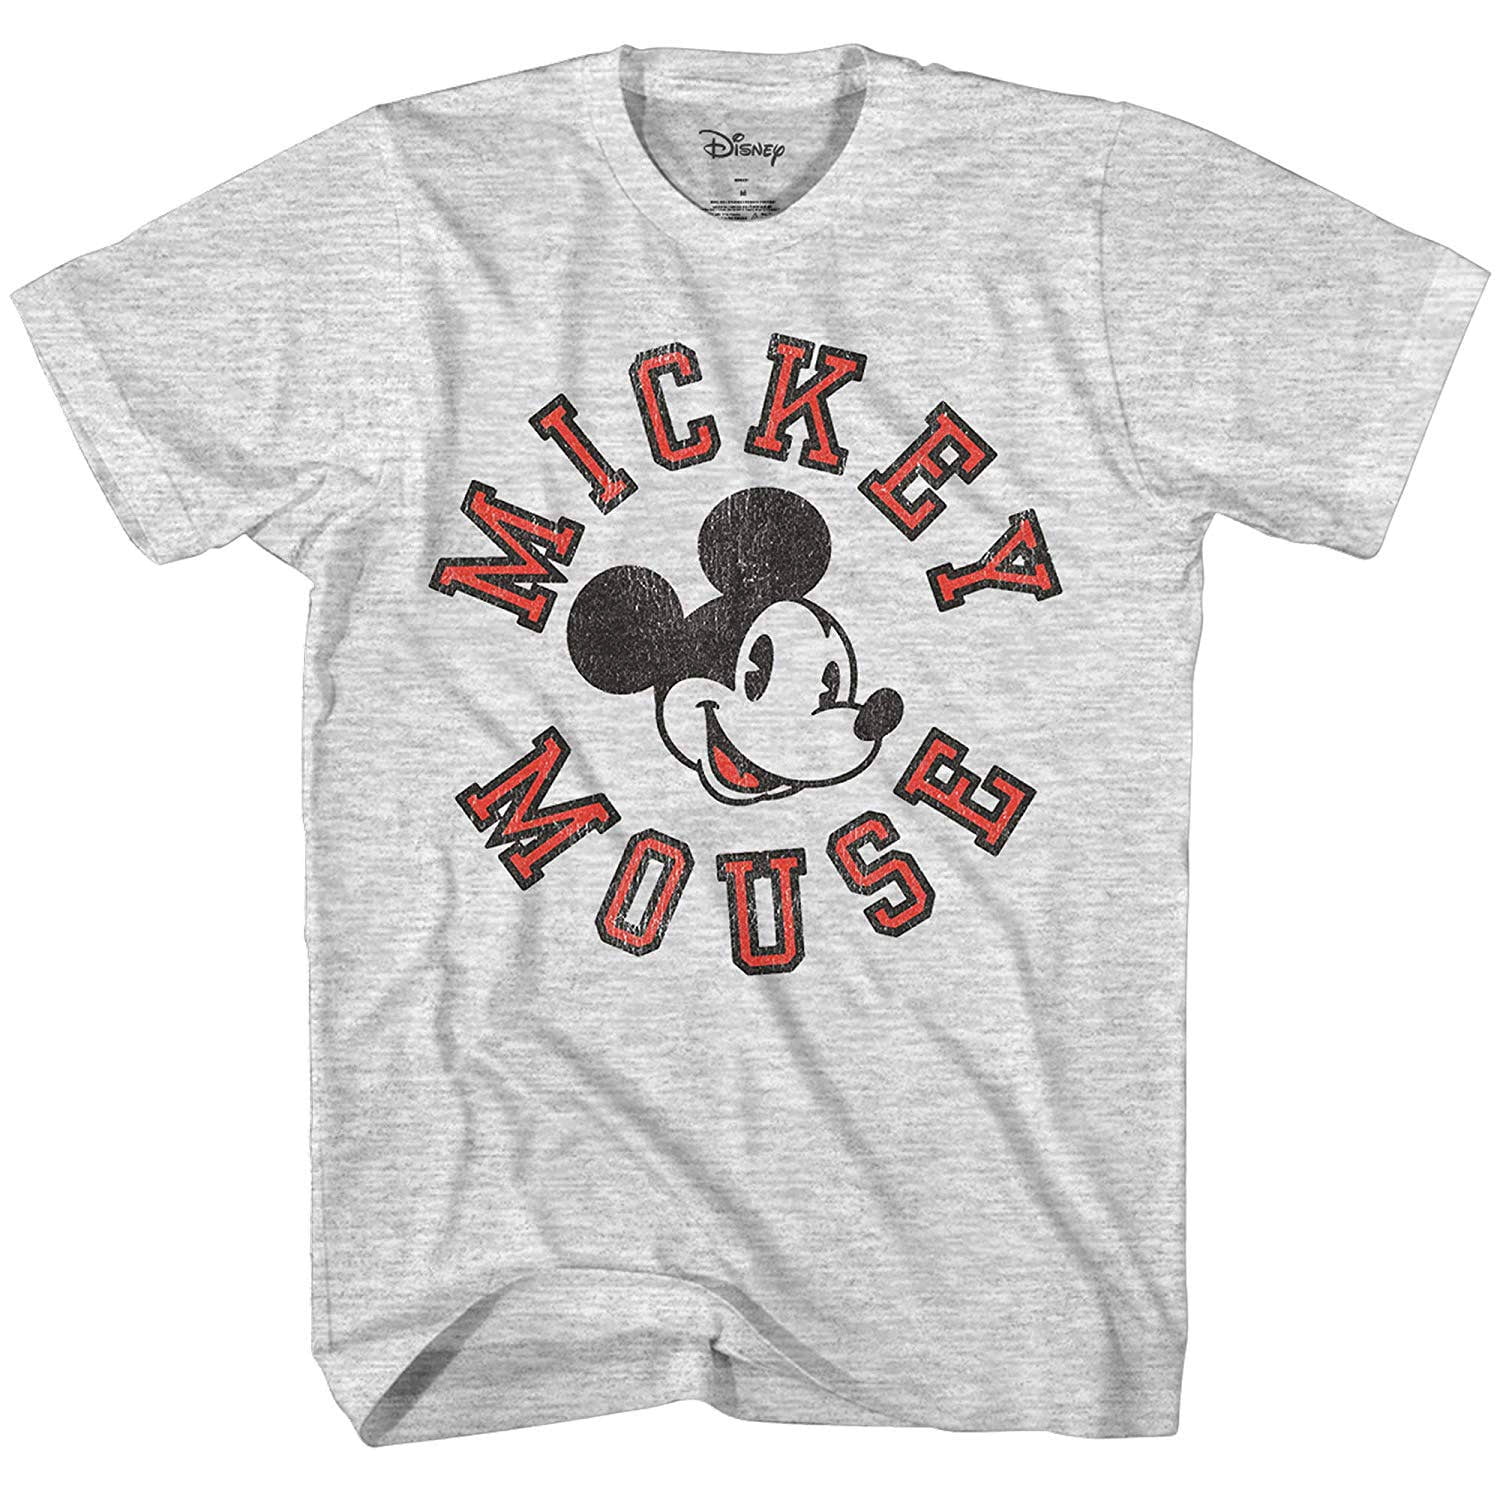 Disney Men S Mickey Mouse Athletic Vintage Classic Distressed Adult T Shirt 2x